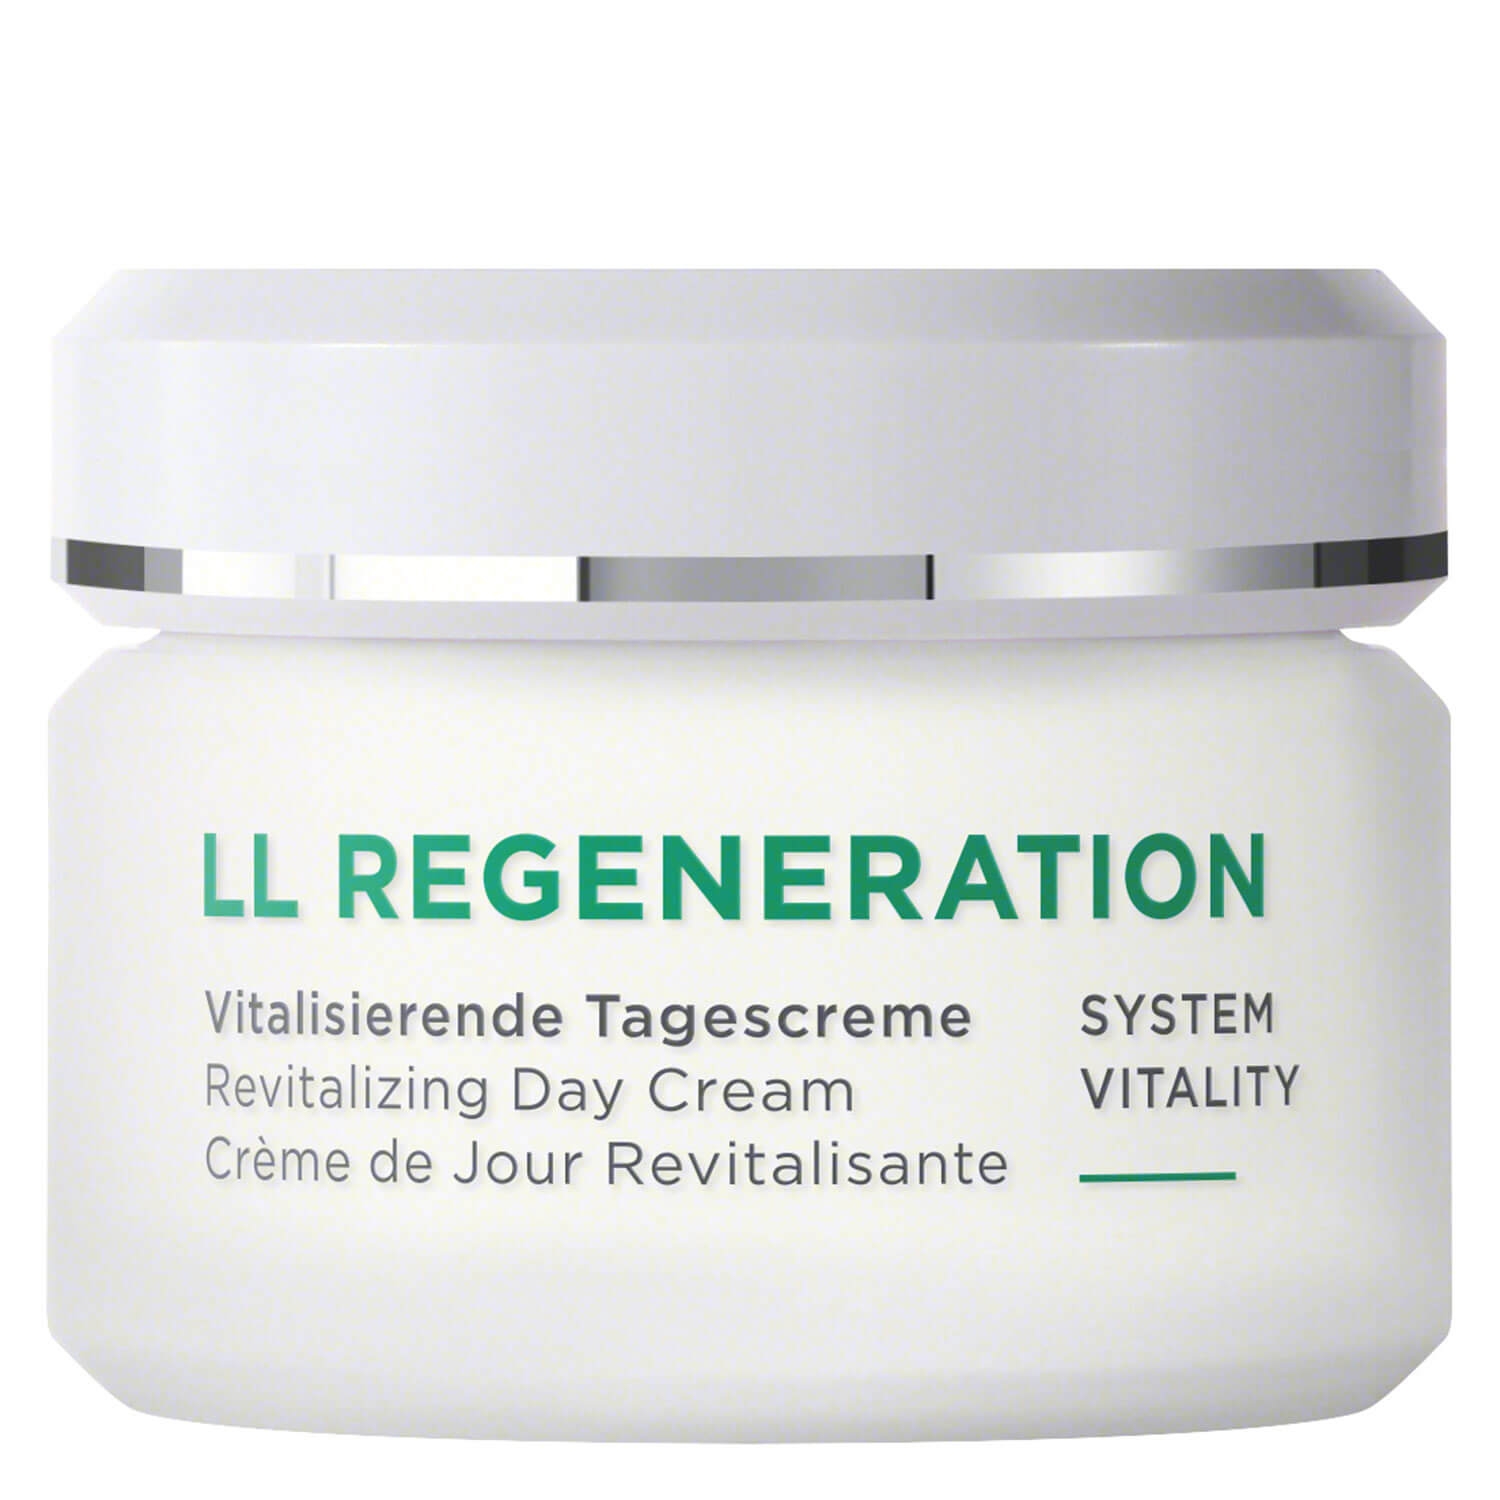 Product image from LL Regeneration - Vitalisierende Tagescreme